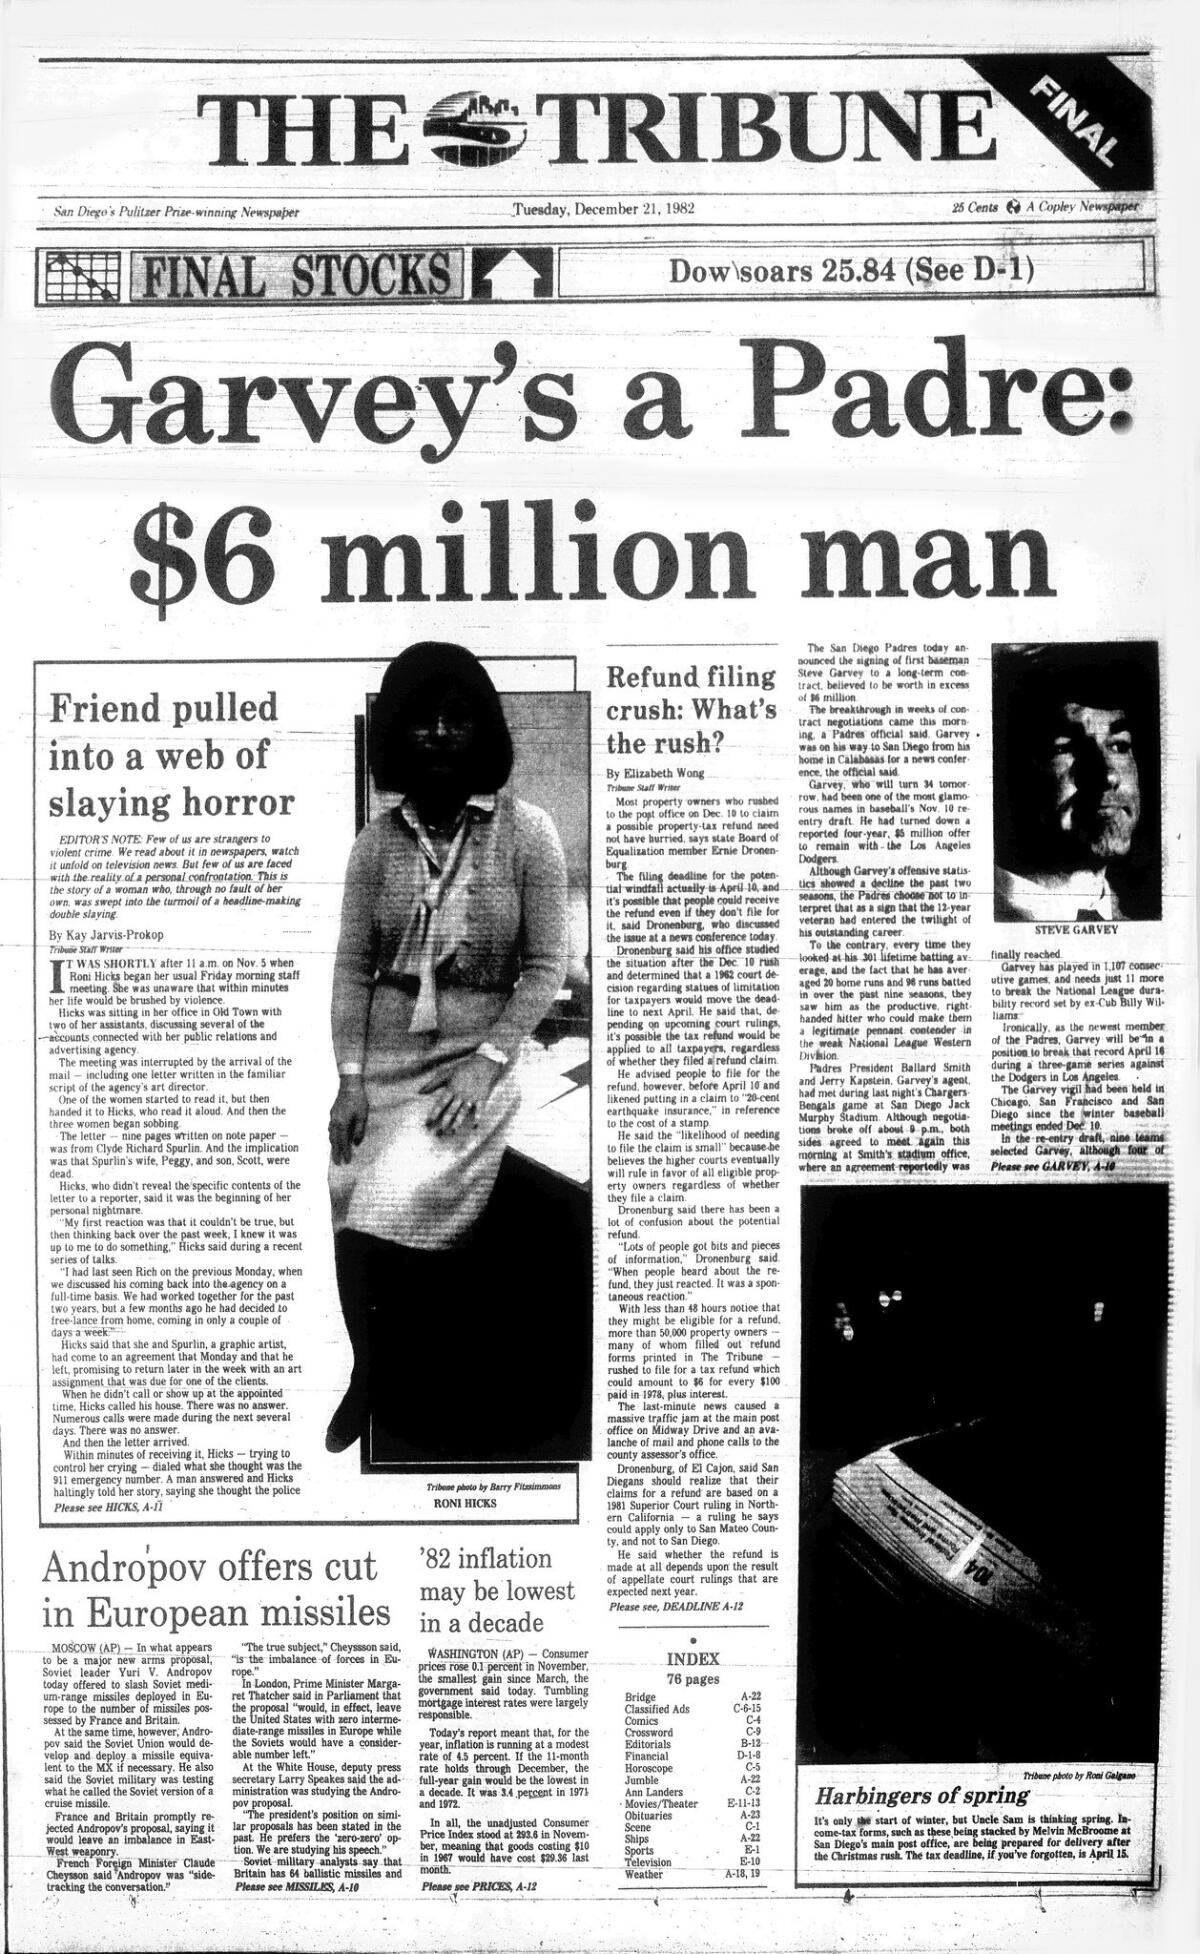 Garvey's number retired by Padres